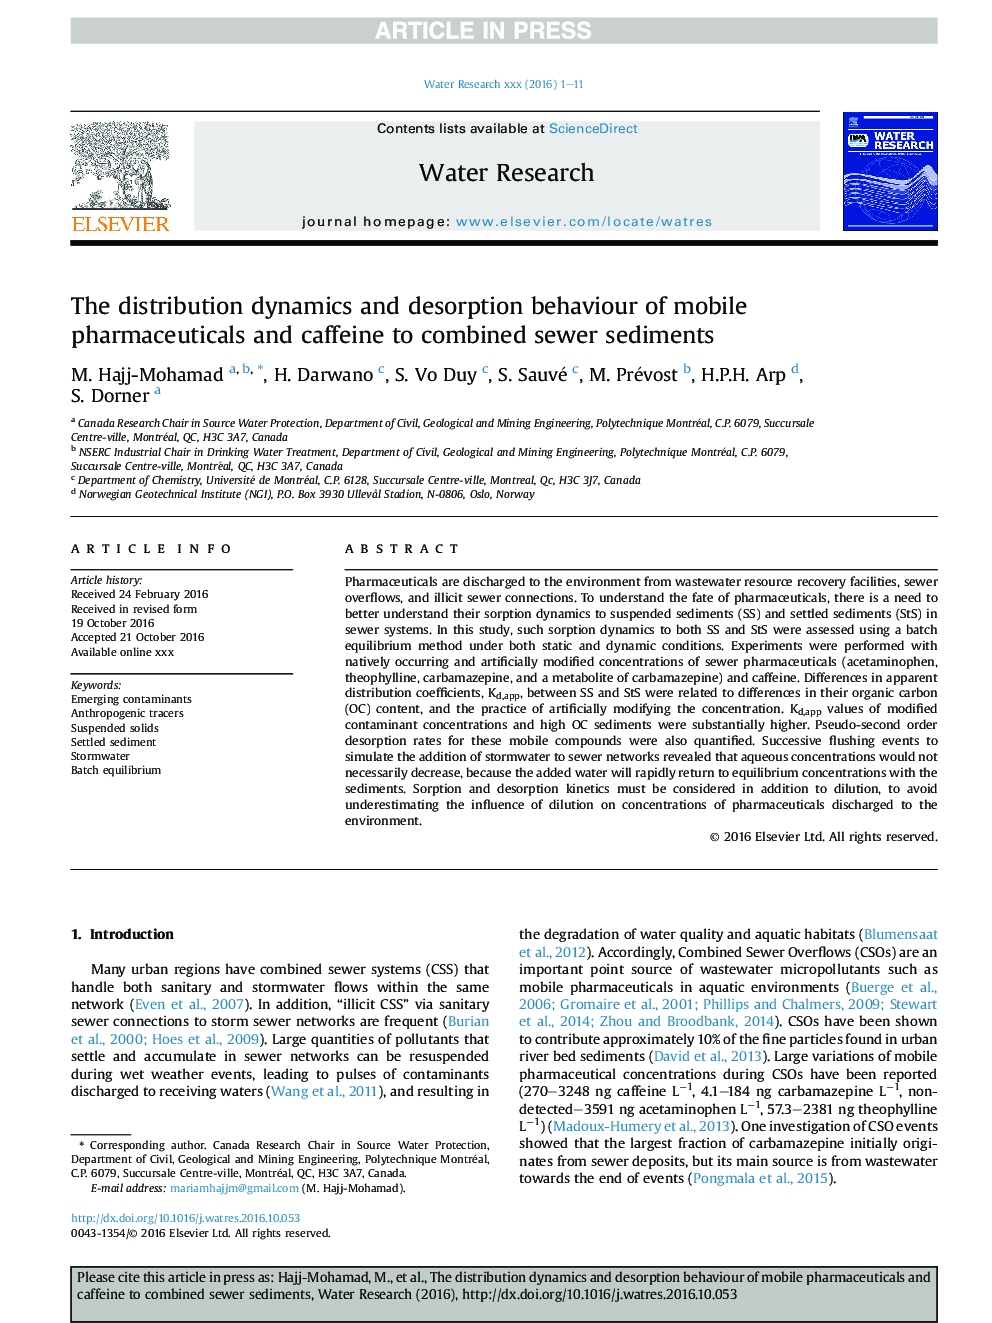 The distribution dynamics and desorption behaviour of mobile pharmaceuticals and caffeine to combined sewer sediments